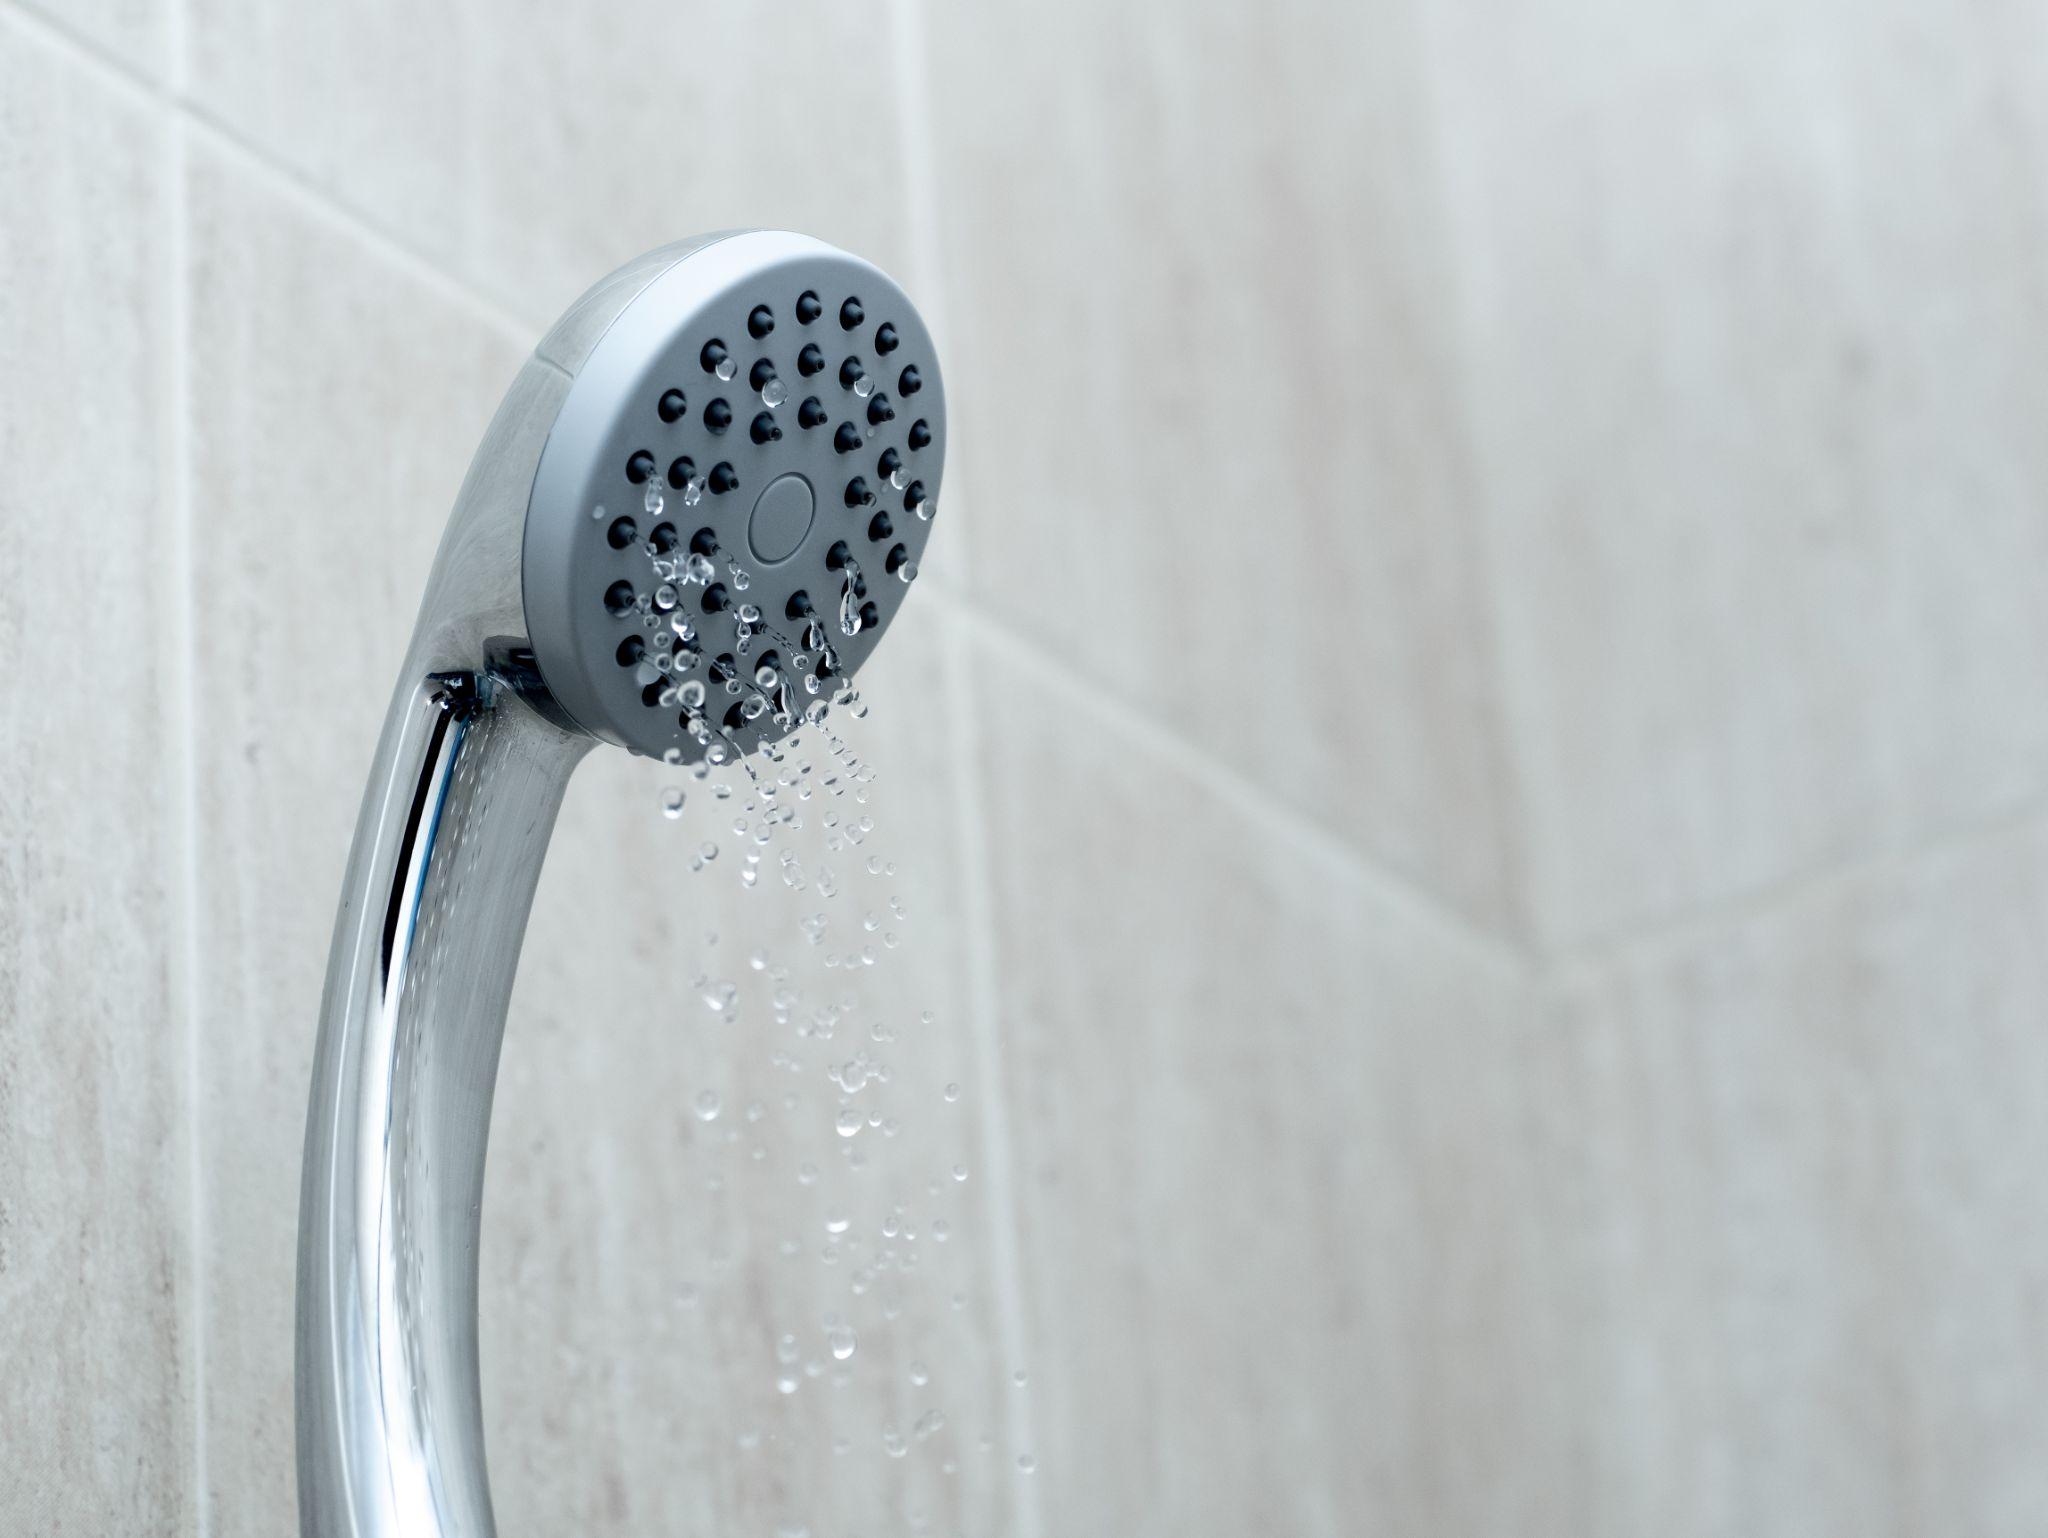 Shower head with low water pressure